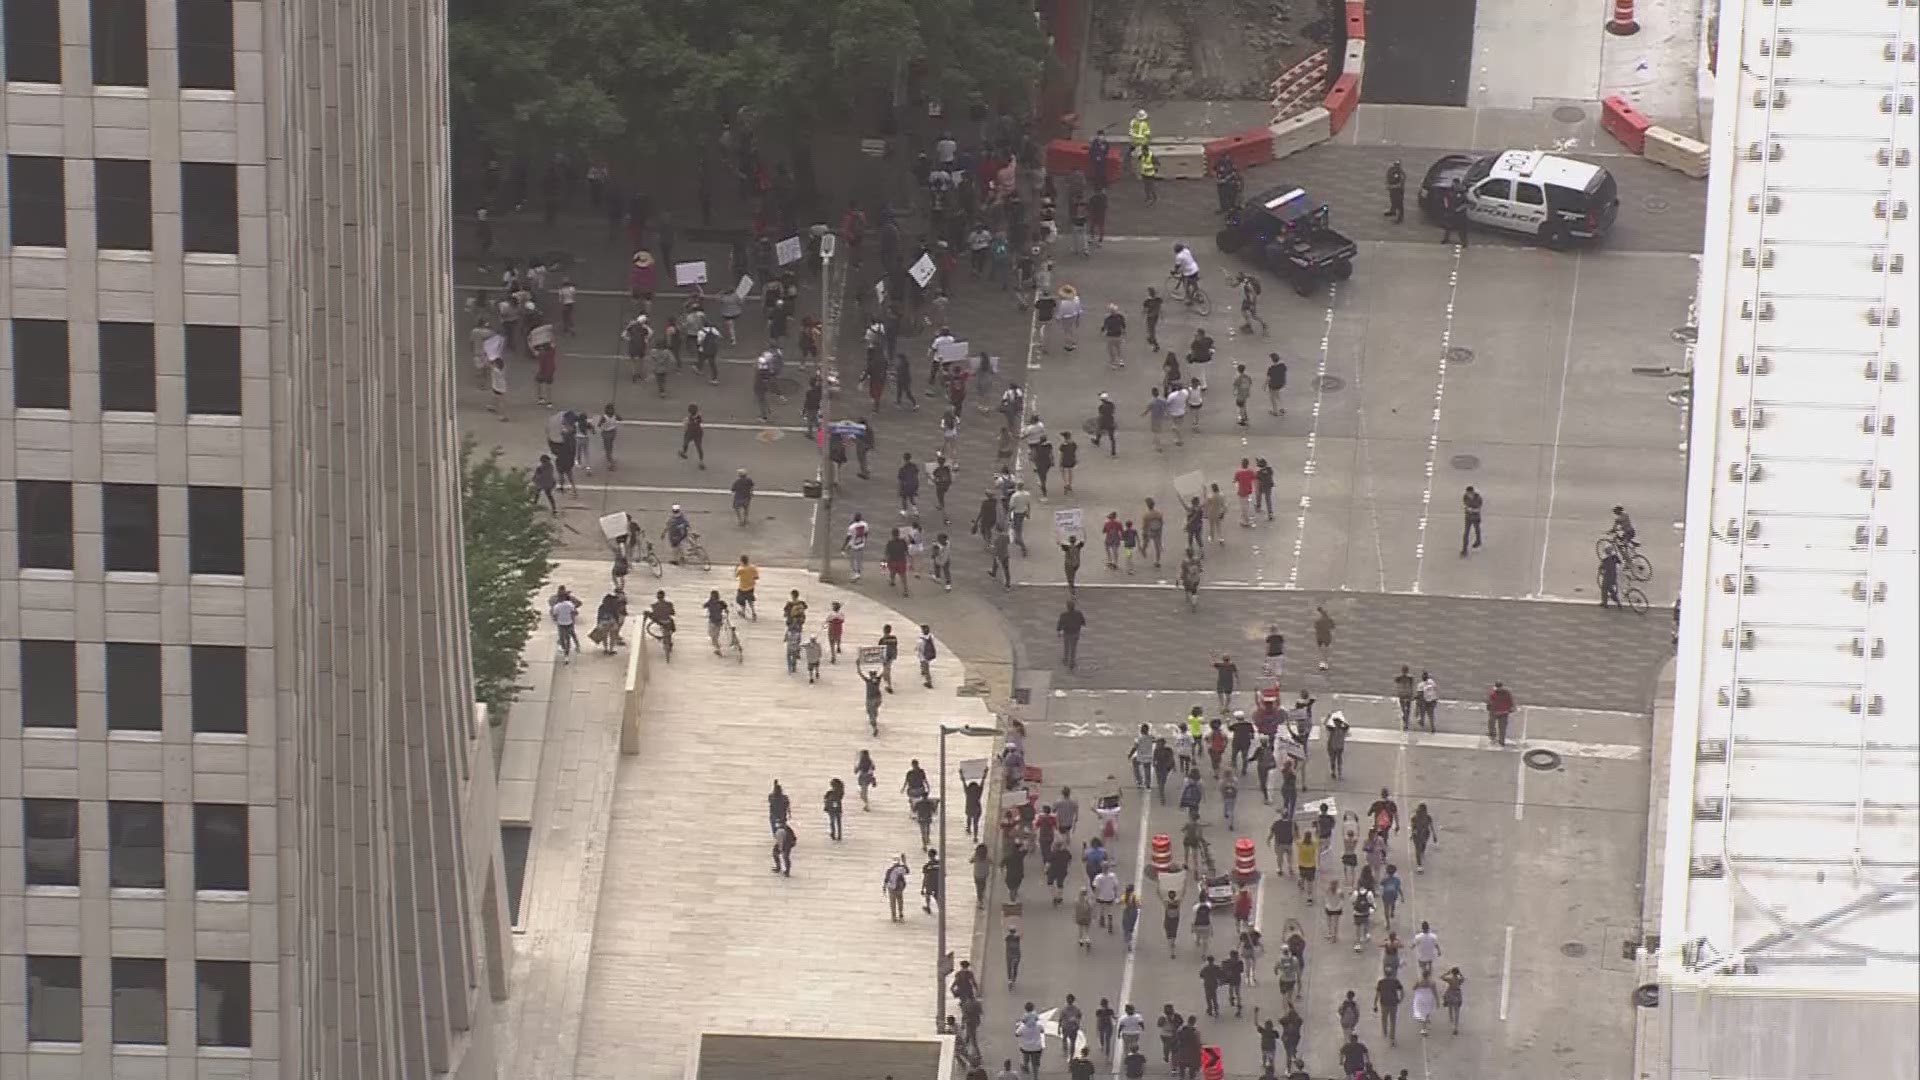 These are images from Air 11 of the march to protest the death of George Floyd by a Minneapolis officer.